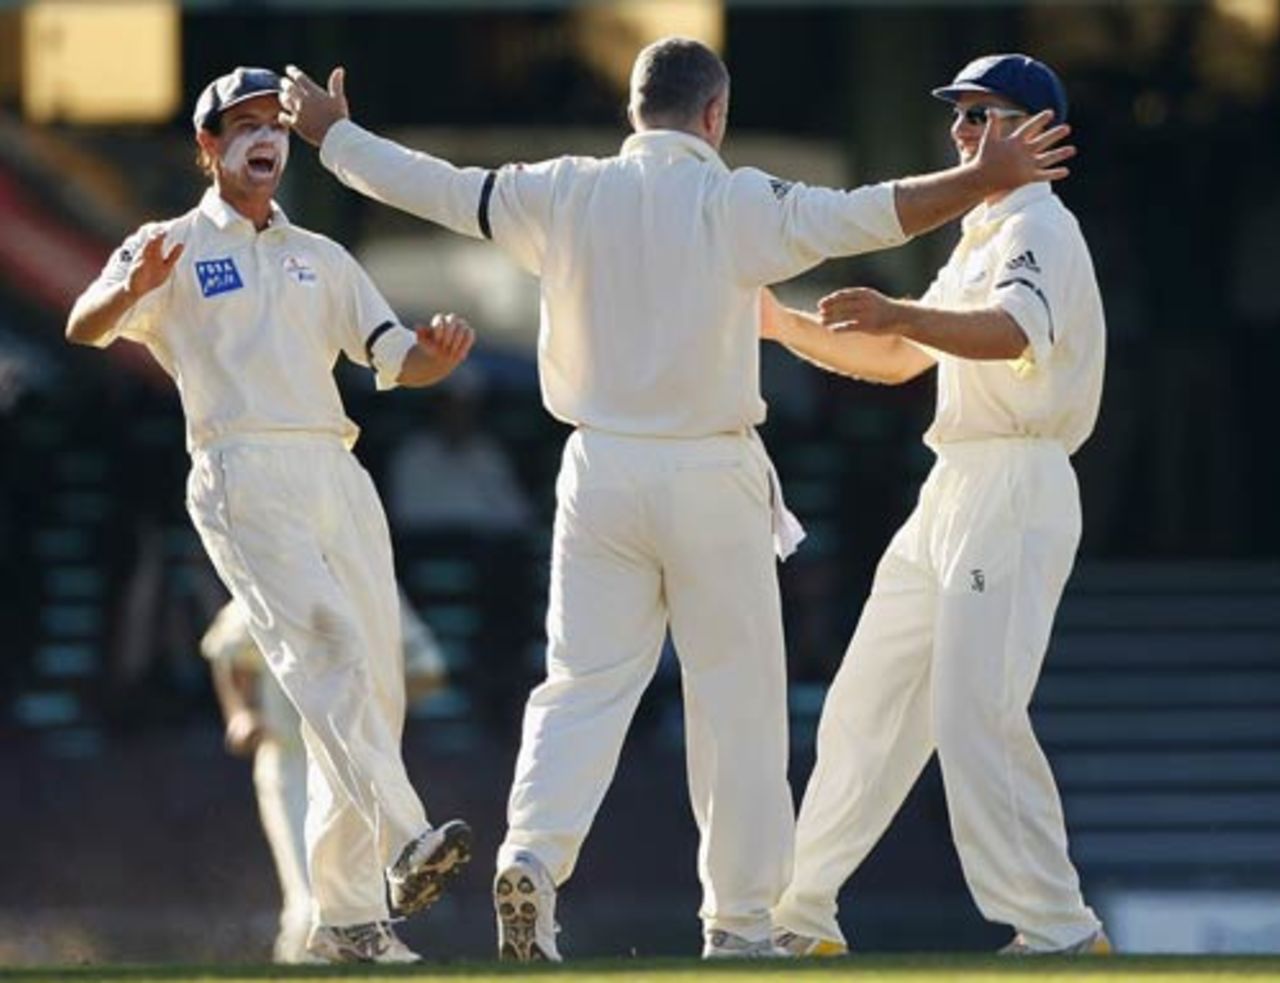 Stuart MacGill is congratulated after claiming a wicket with his first ball, New South Wales v Victoria, Pura Cup final, 4th day, Sydney, March 18, 2008